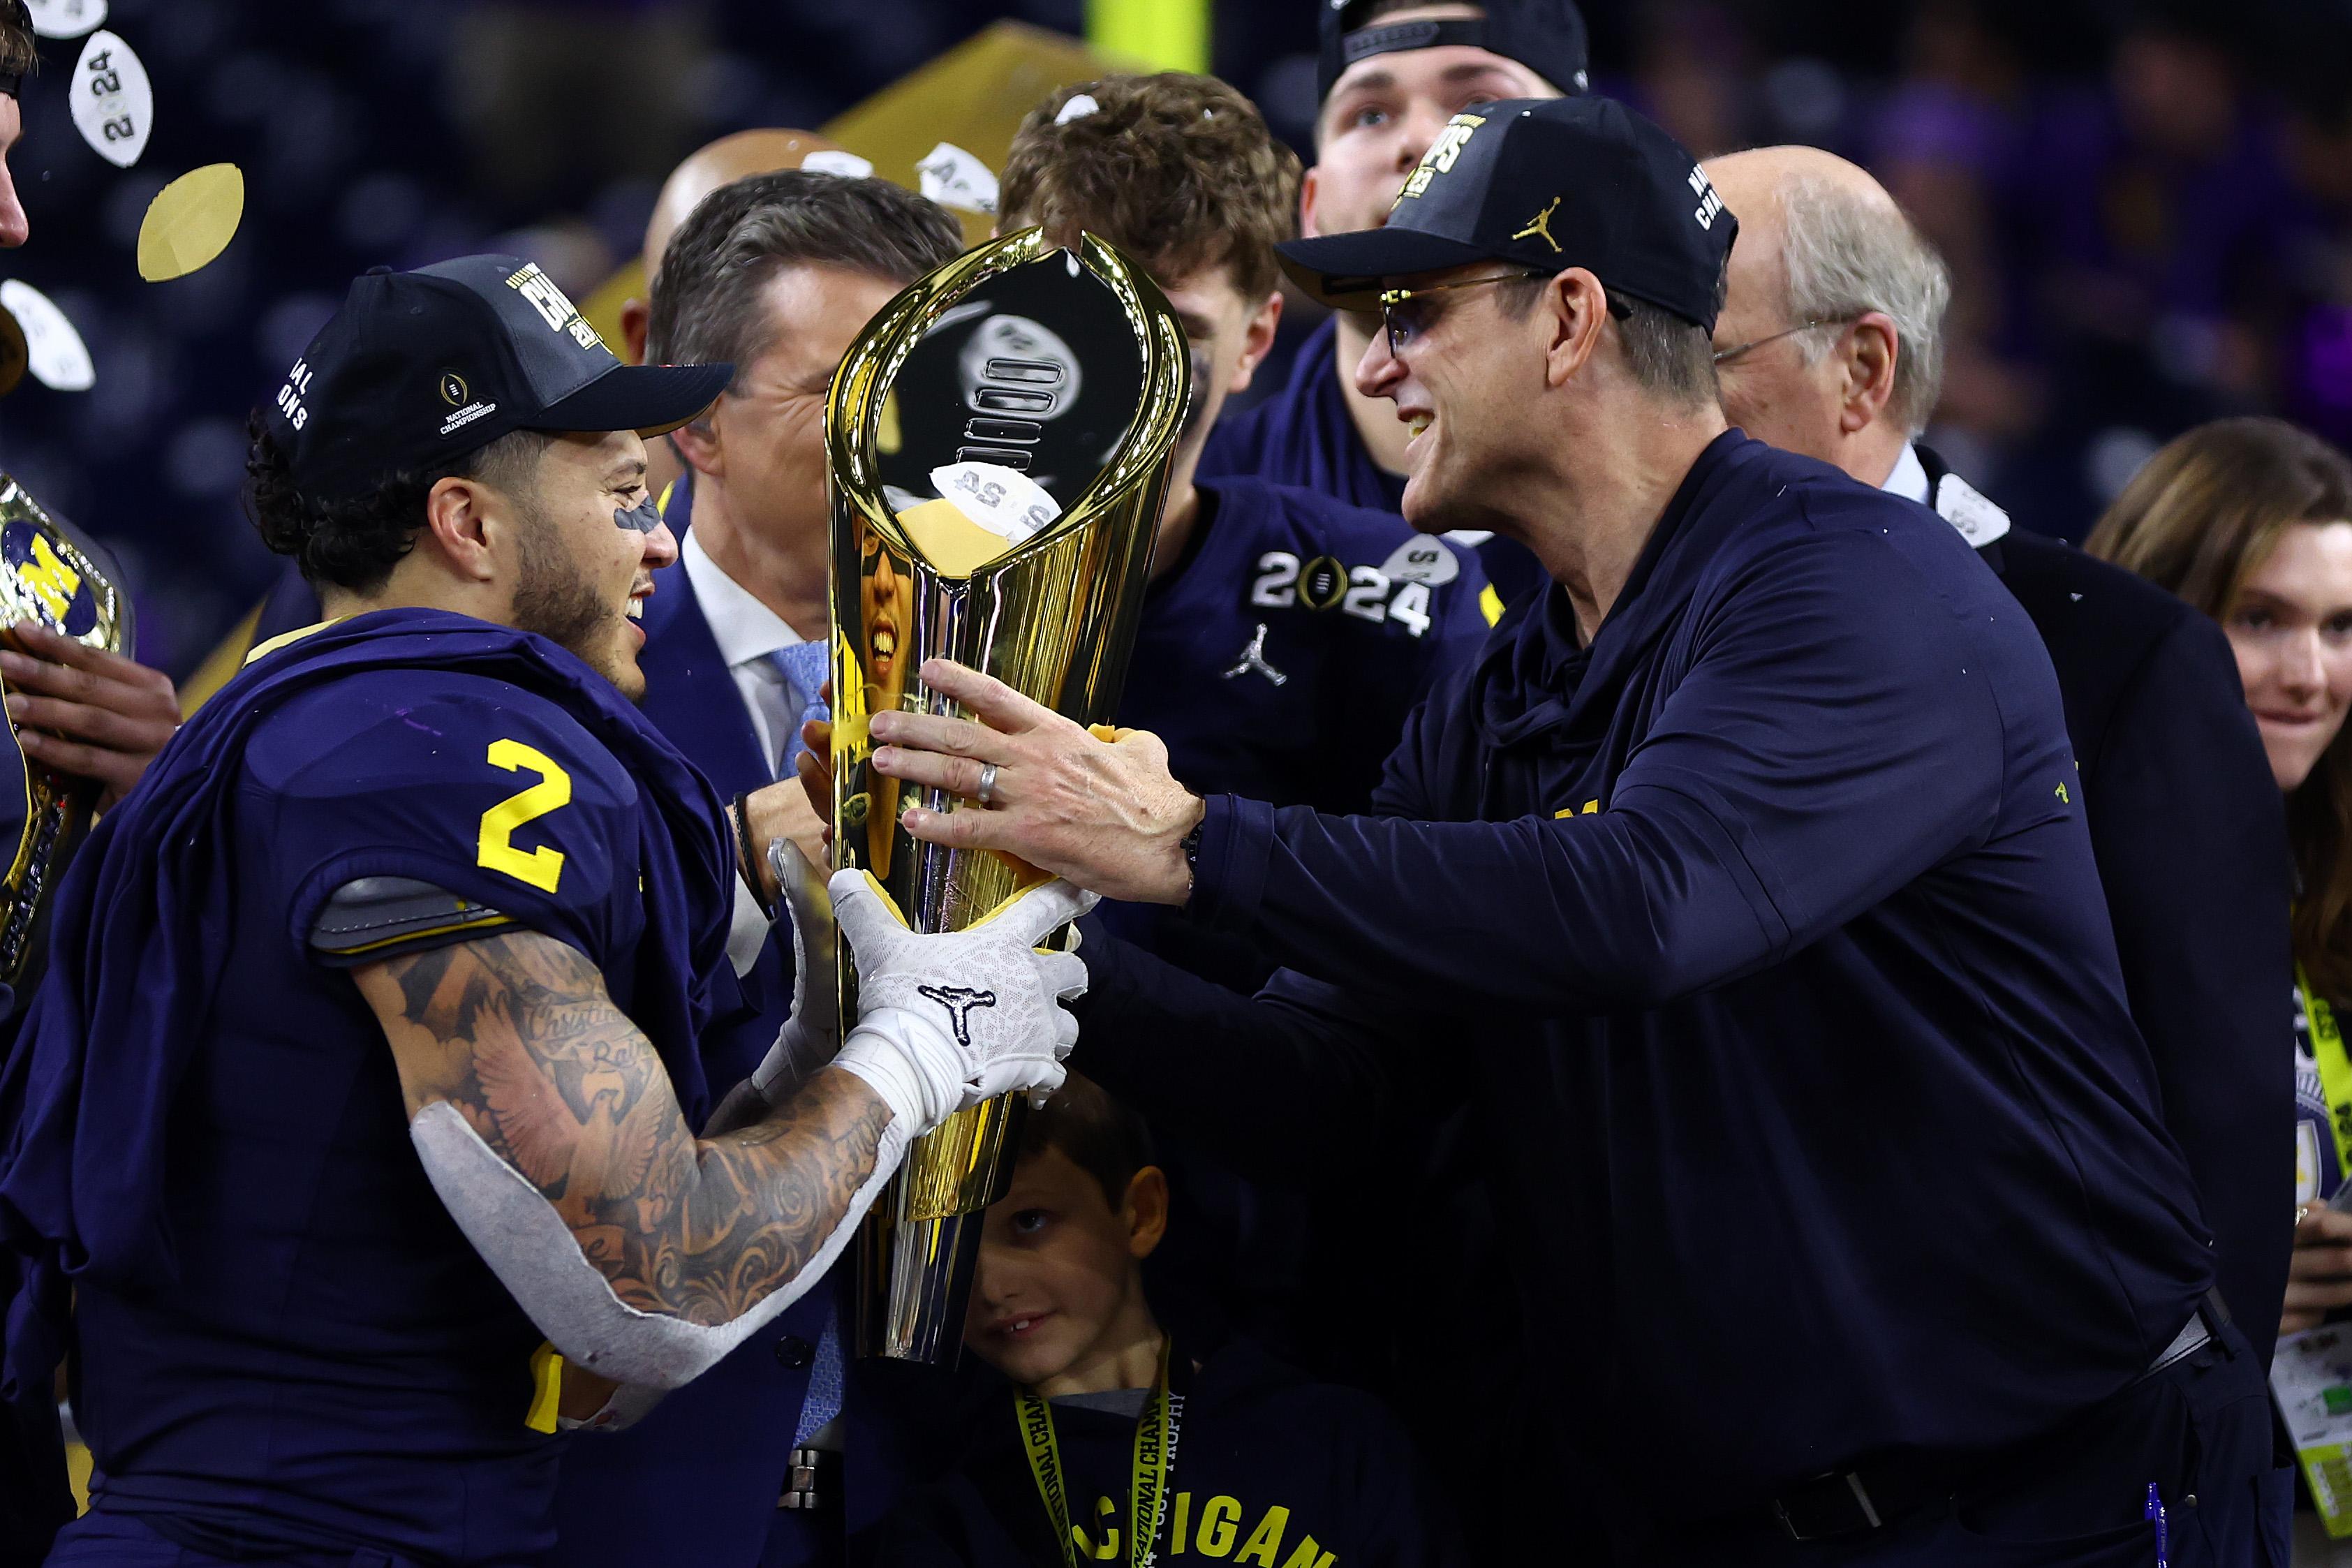 Corum and Harbaugh talk and smile at each other as they hold the trophy together.